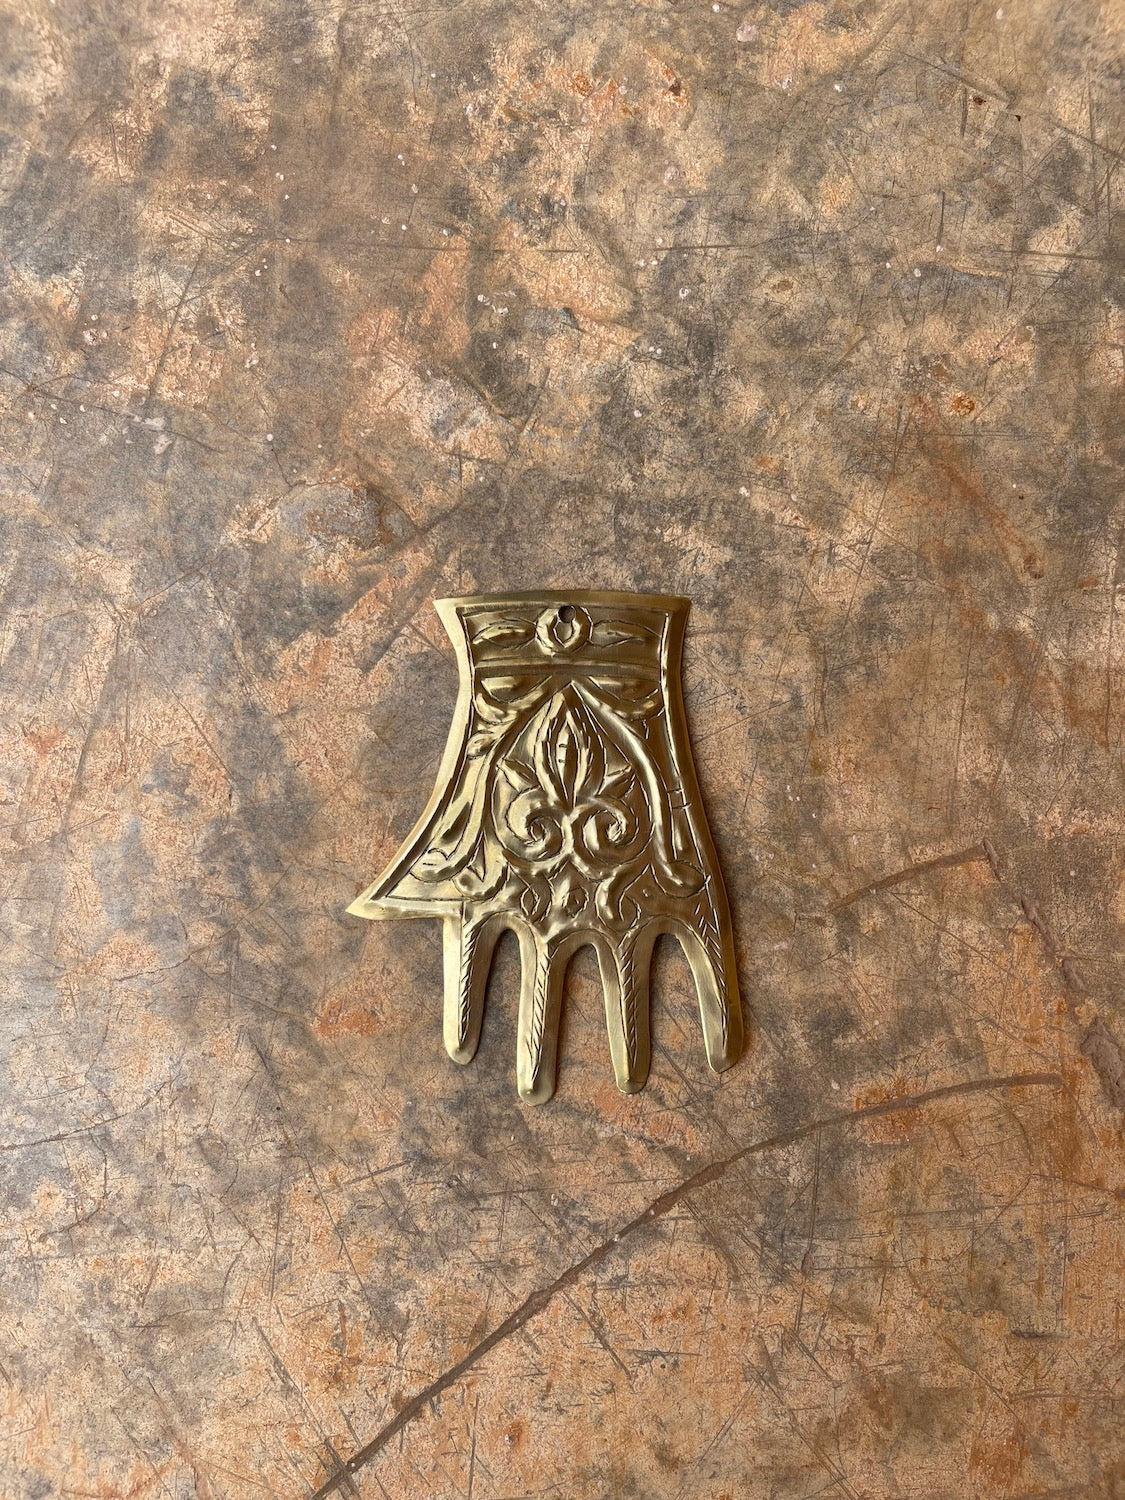 Moroccan Brass Wall Decor Hand Metal Wall Ornament Decor Une Vie Nomade Brand_Une Vie Nomade Home_Decor New Arrivals IMG_1856MoroccanBrassMetalWallDecorSmallHand